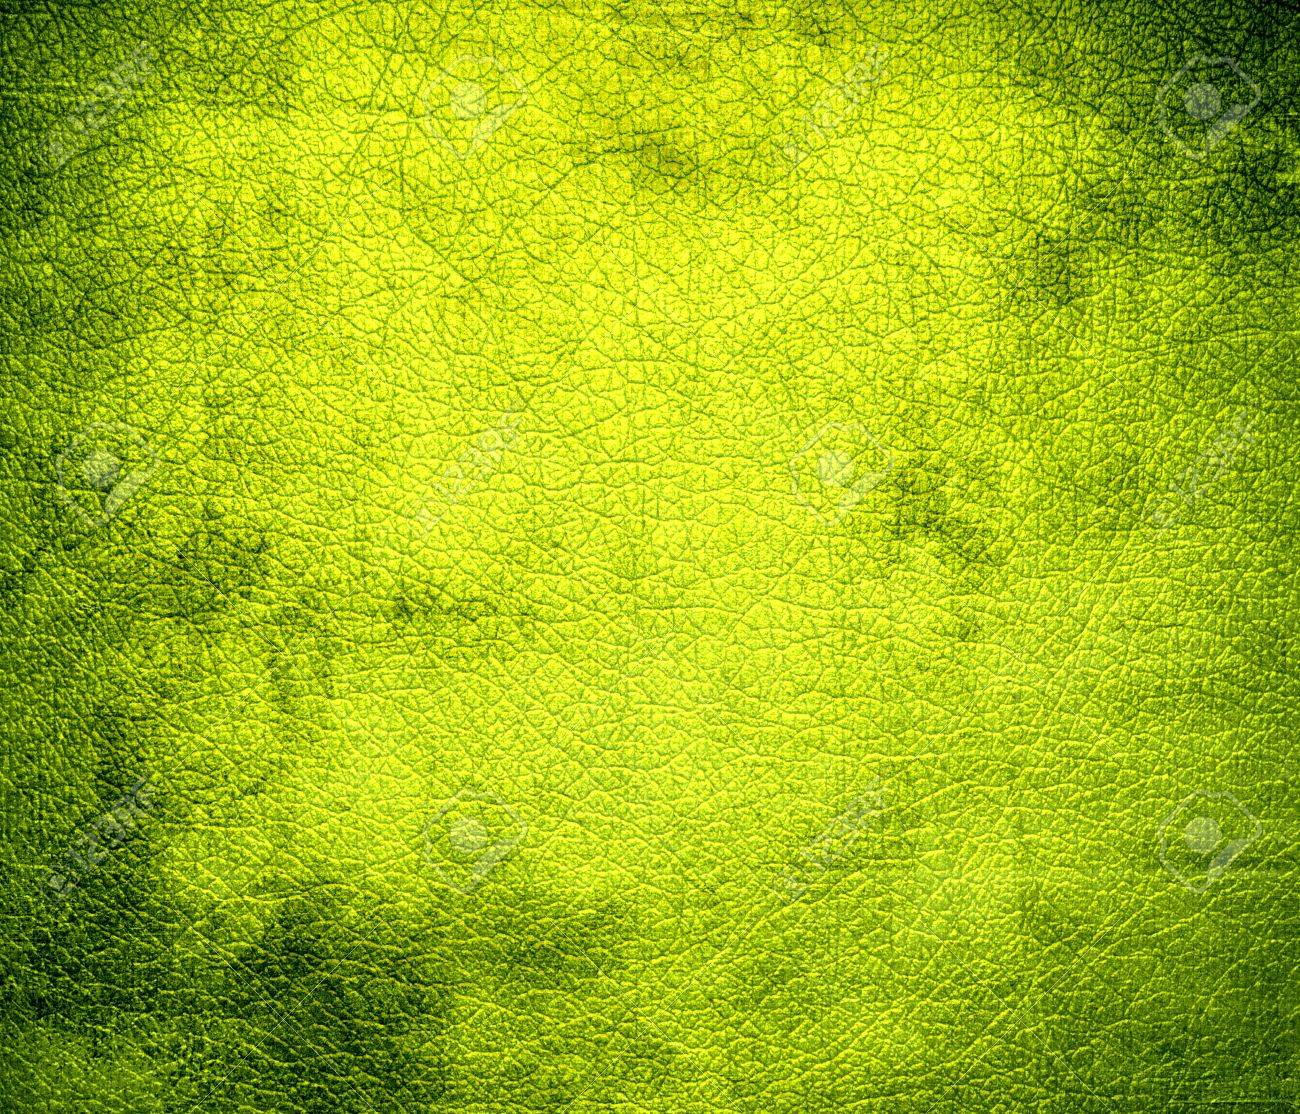 Grunge Background Of Chartreuse Traditional Leather Texture Stock